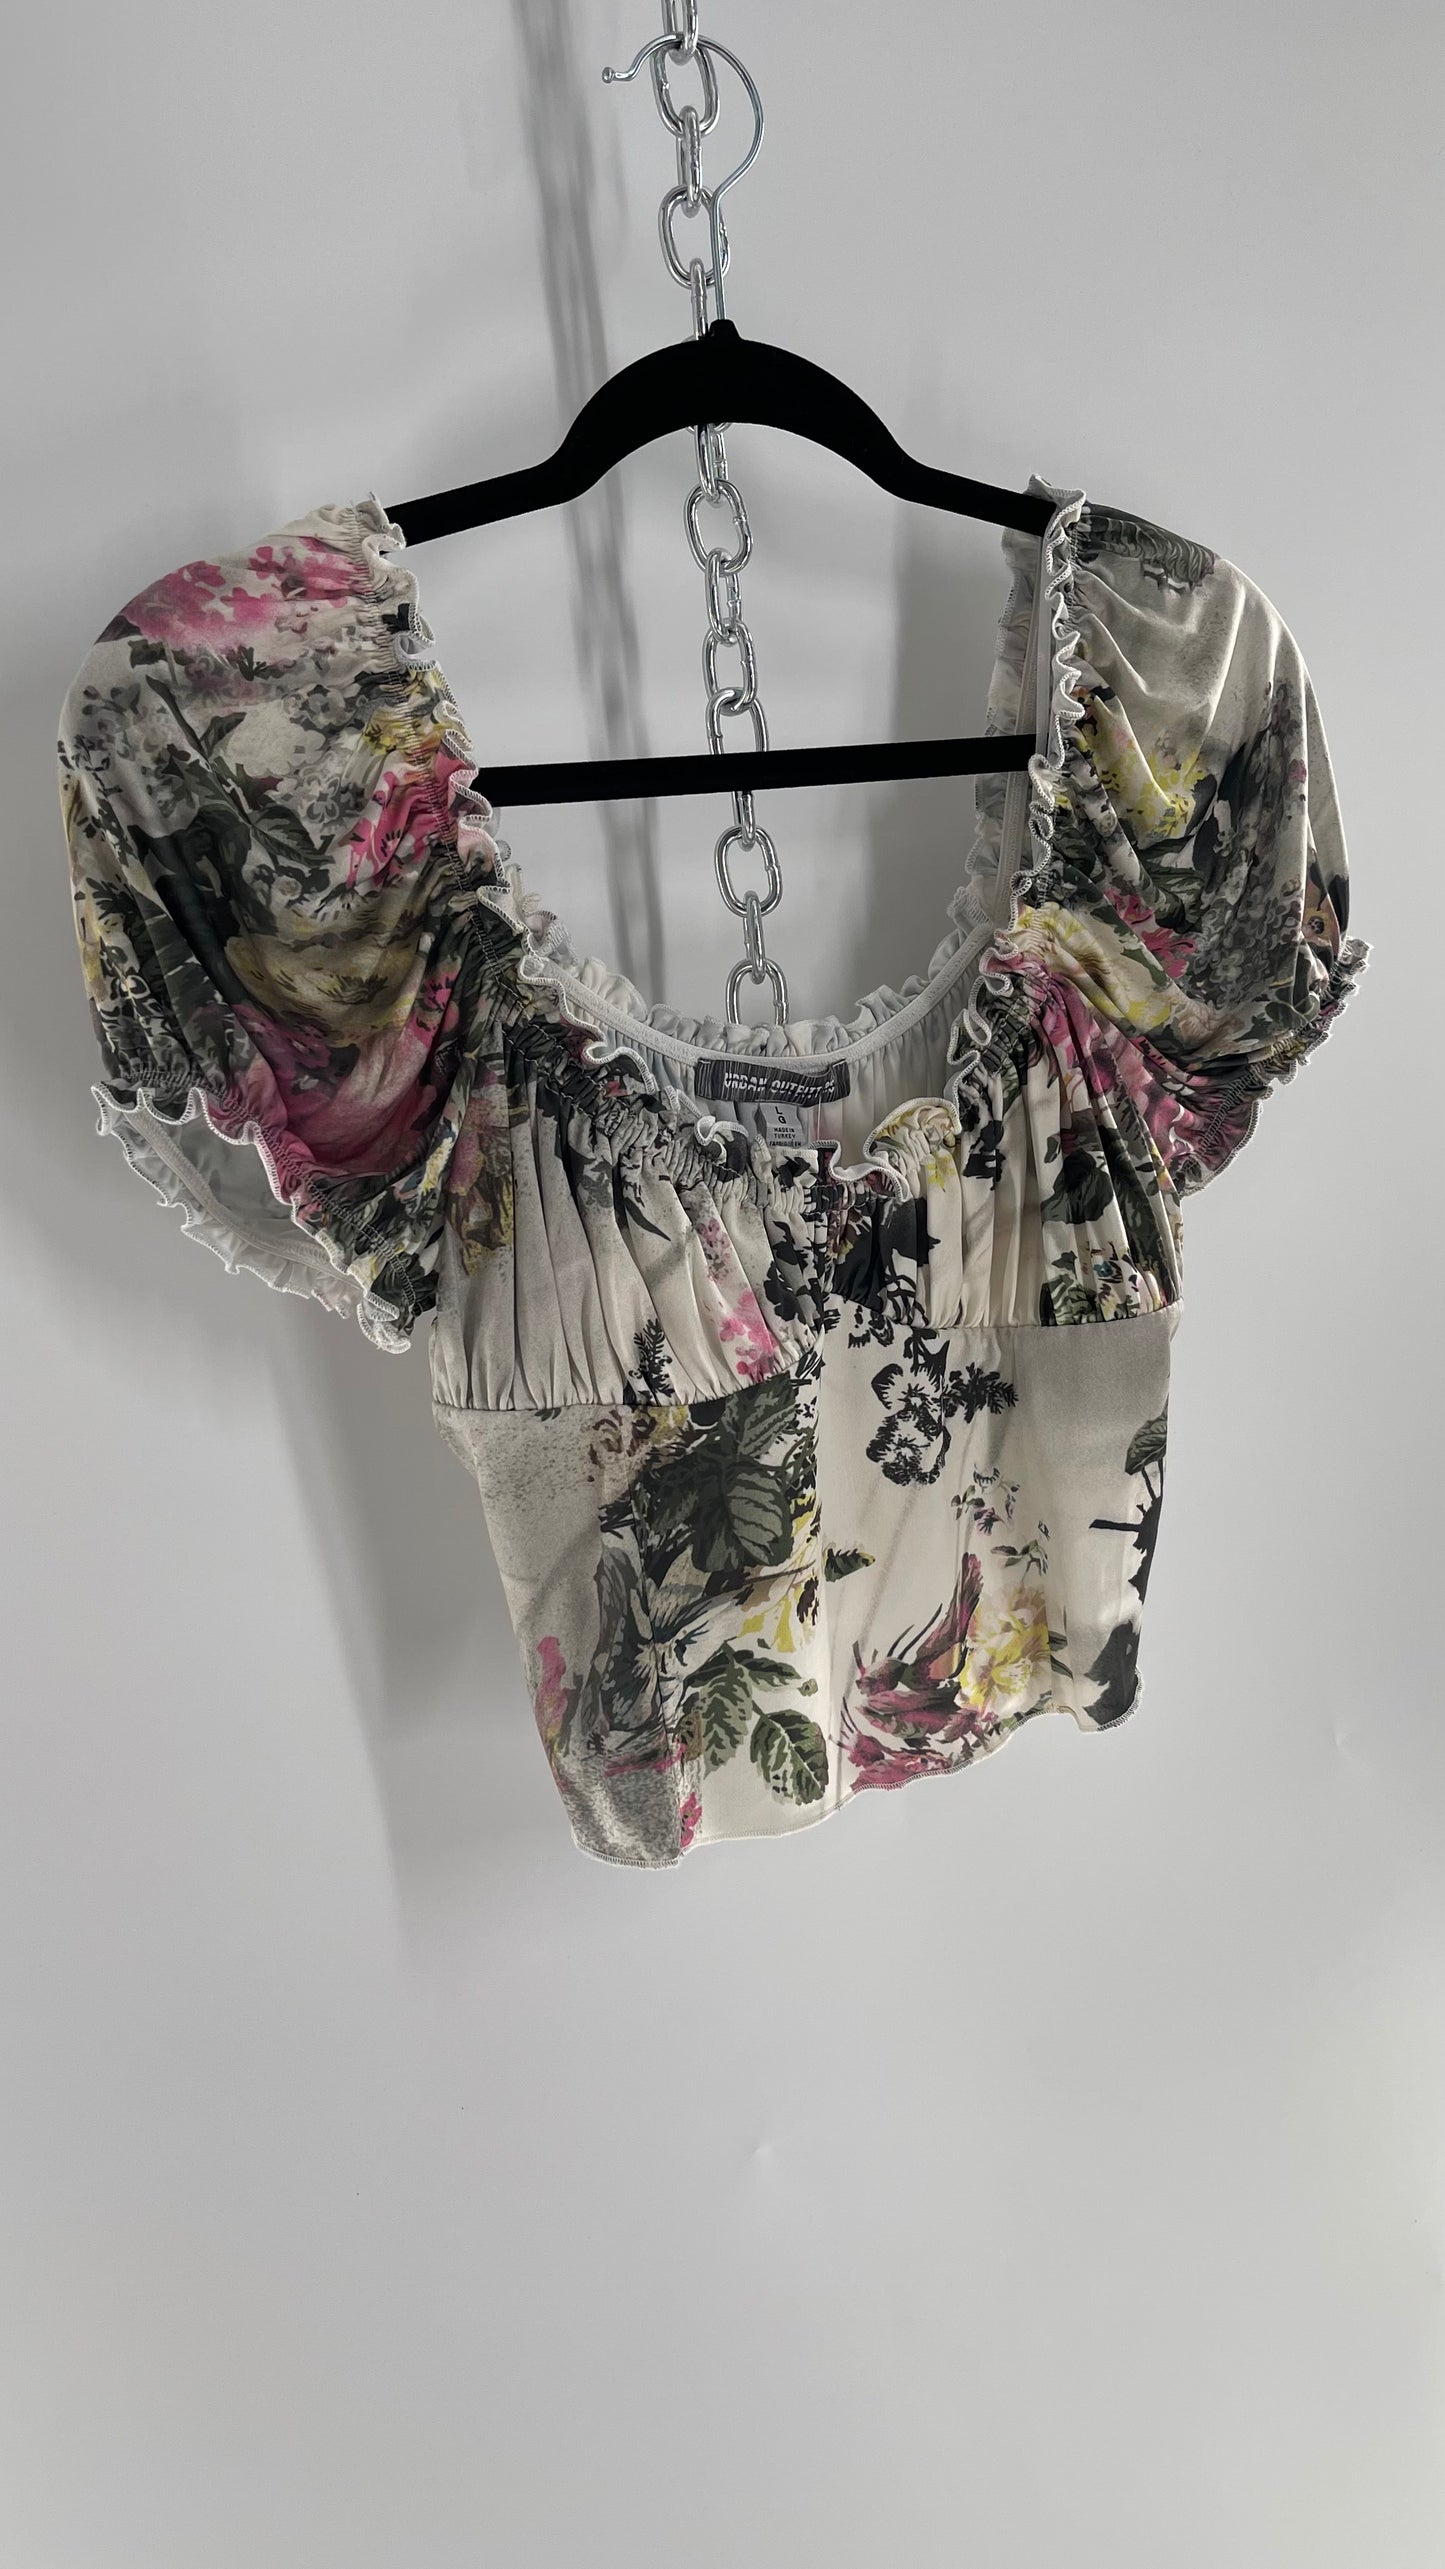 Urban Outfitters Slinky Vintage Inspired Graphic Florals and Milkmaid Style Top (Large)